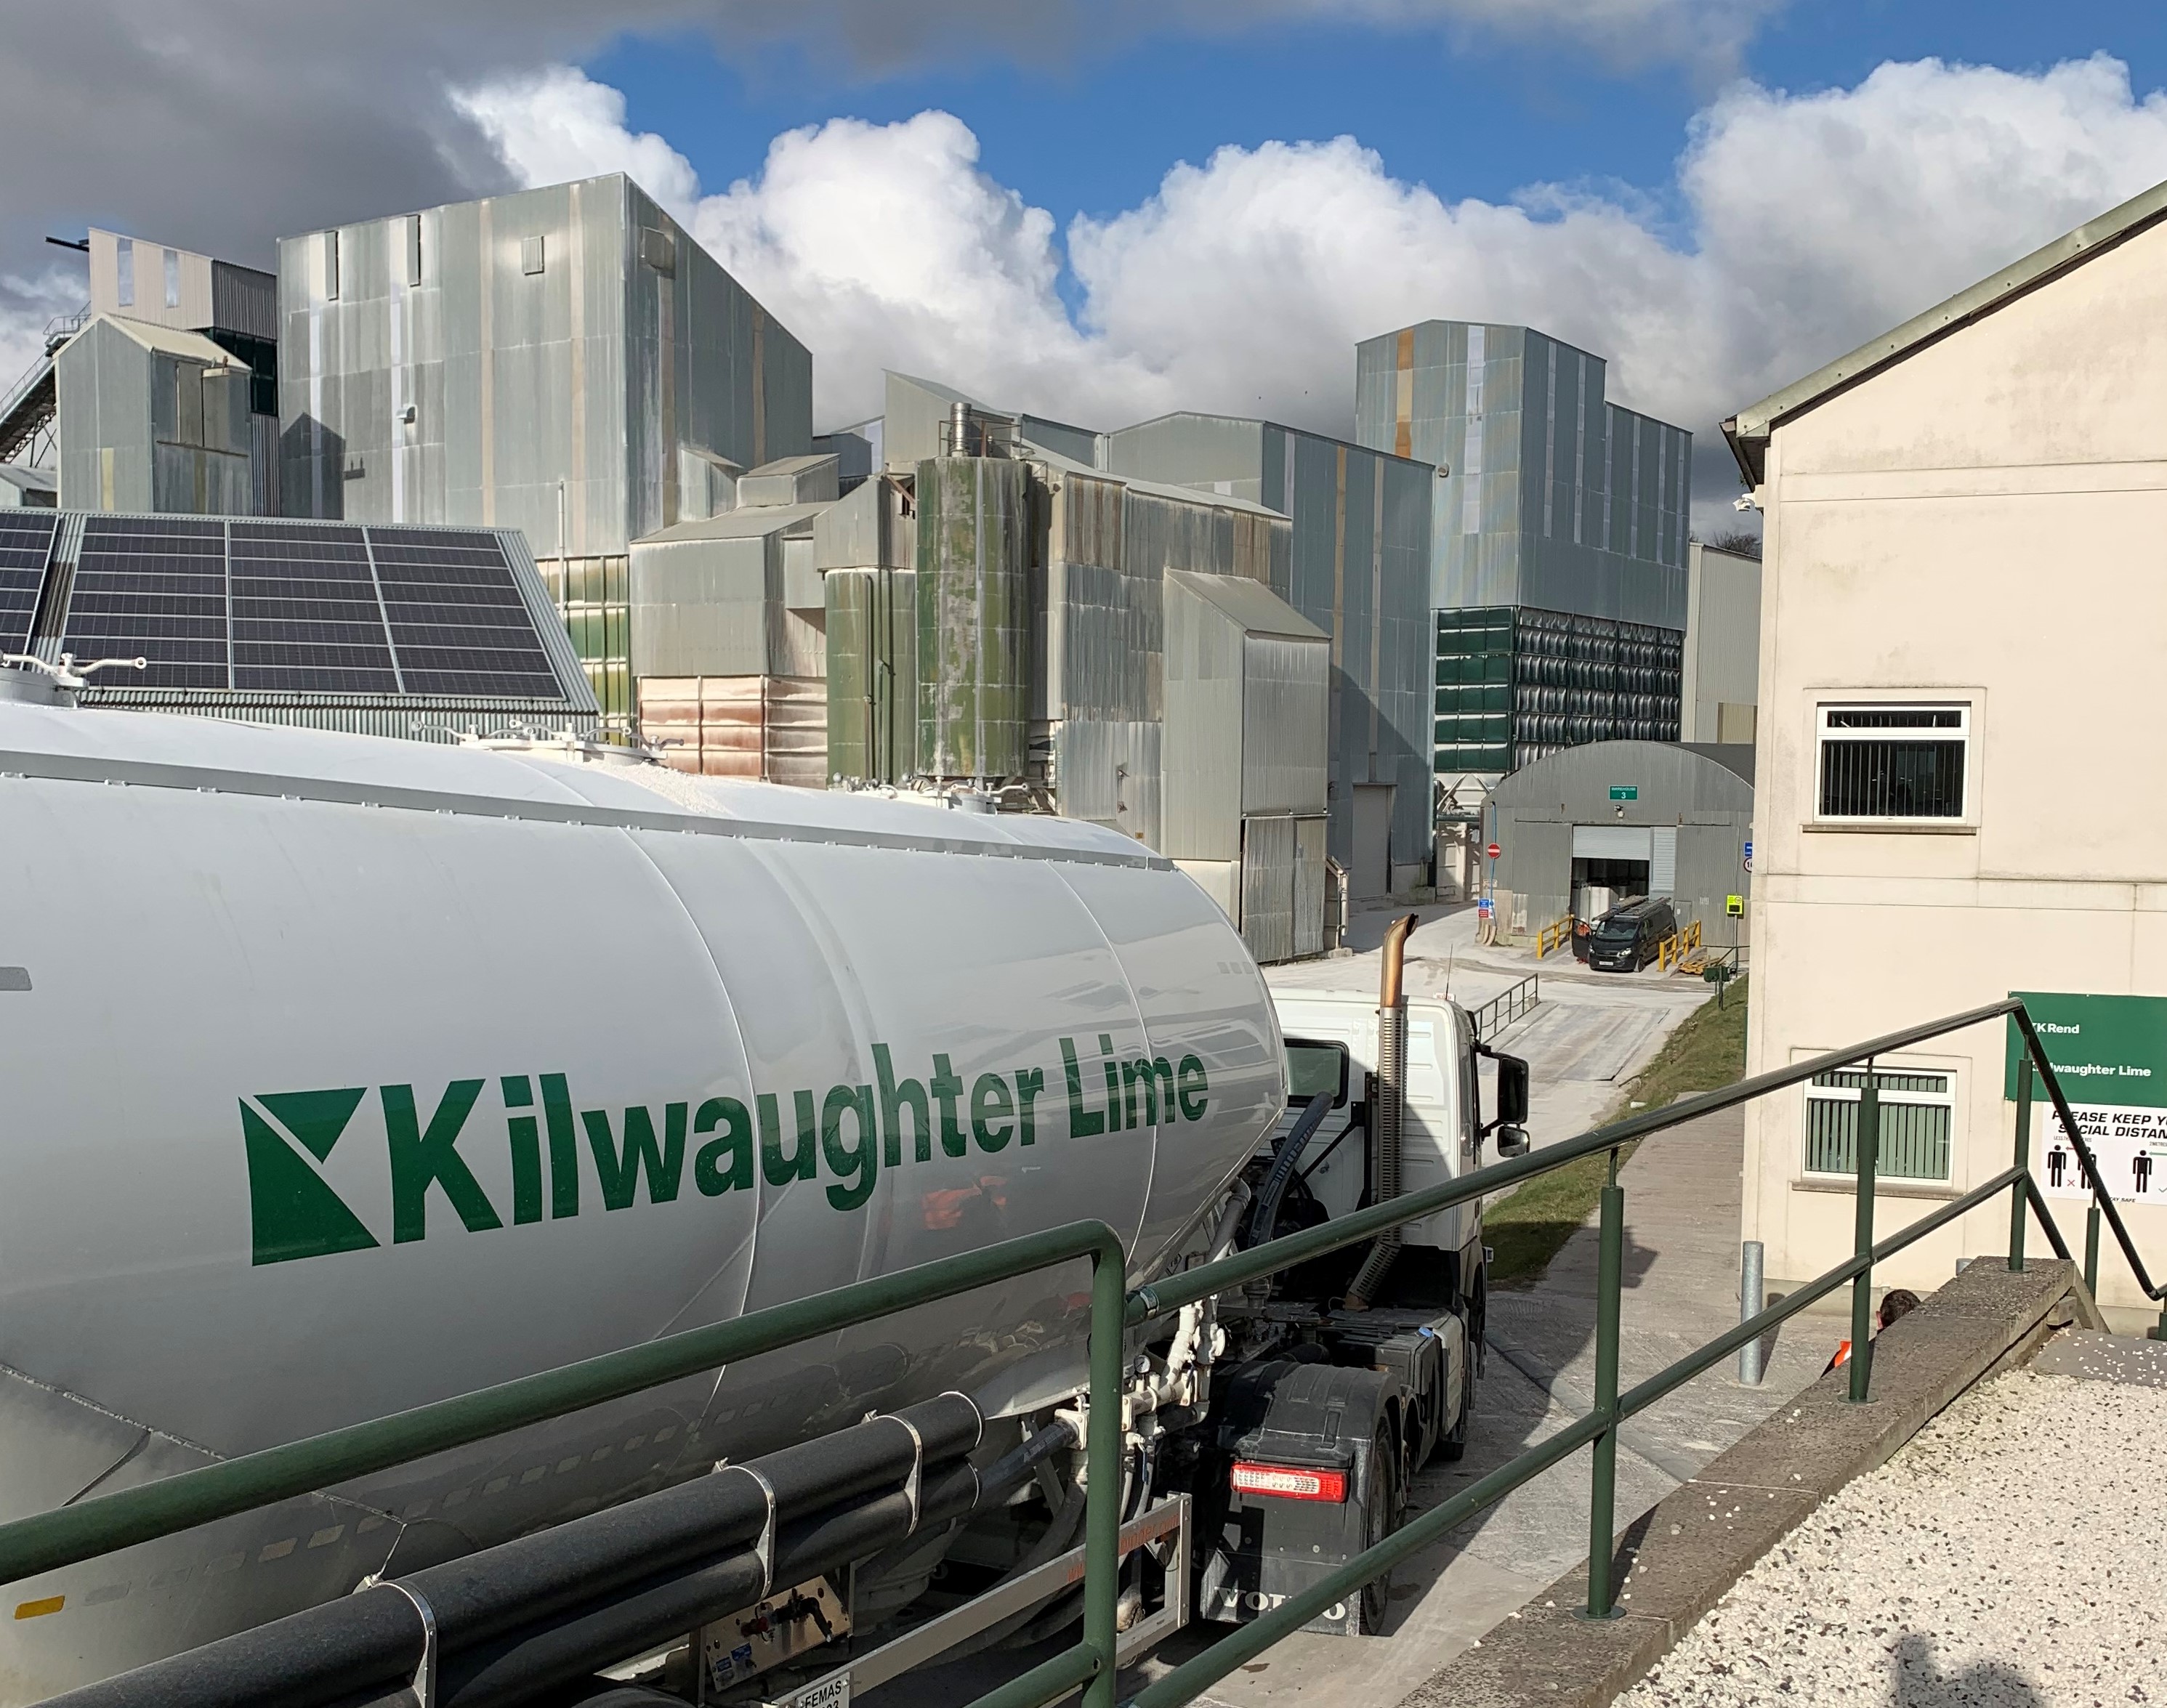 Kilwaughter lorry tank outside factory